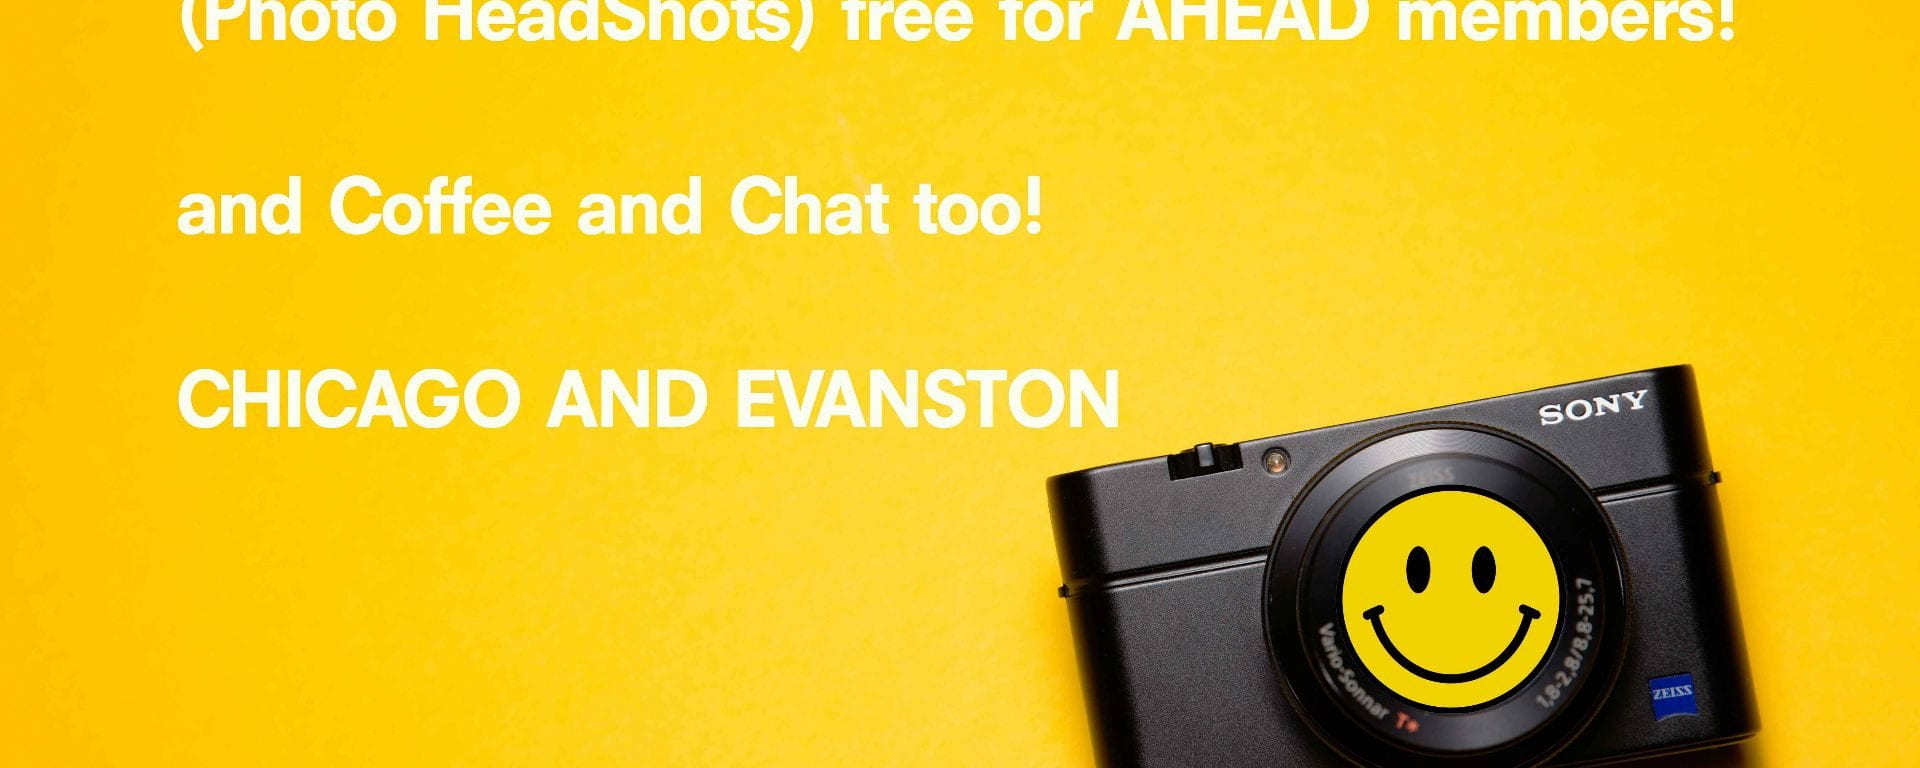 intro graphic with yellow background with a photo of a camera and text that reads "AHEAD shots - photo head shots for AHEAD members on Chicago and Evanston campuses